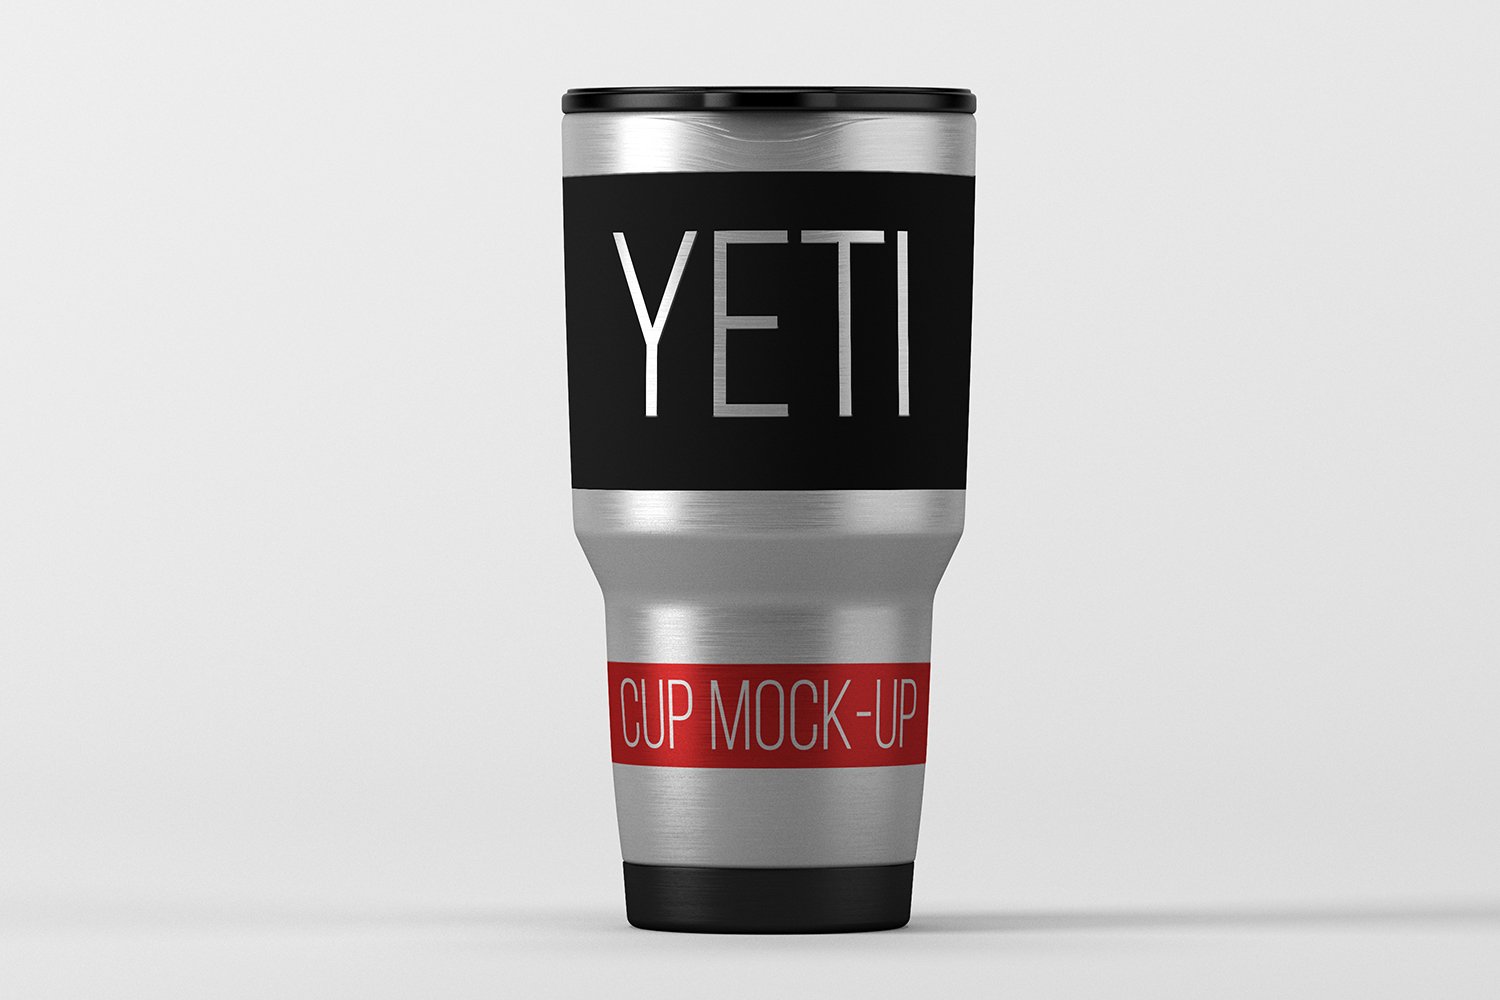 Metallic yeti cup with a black label.